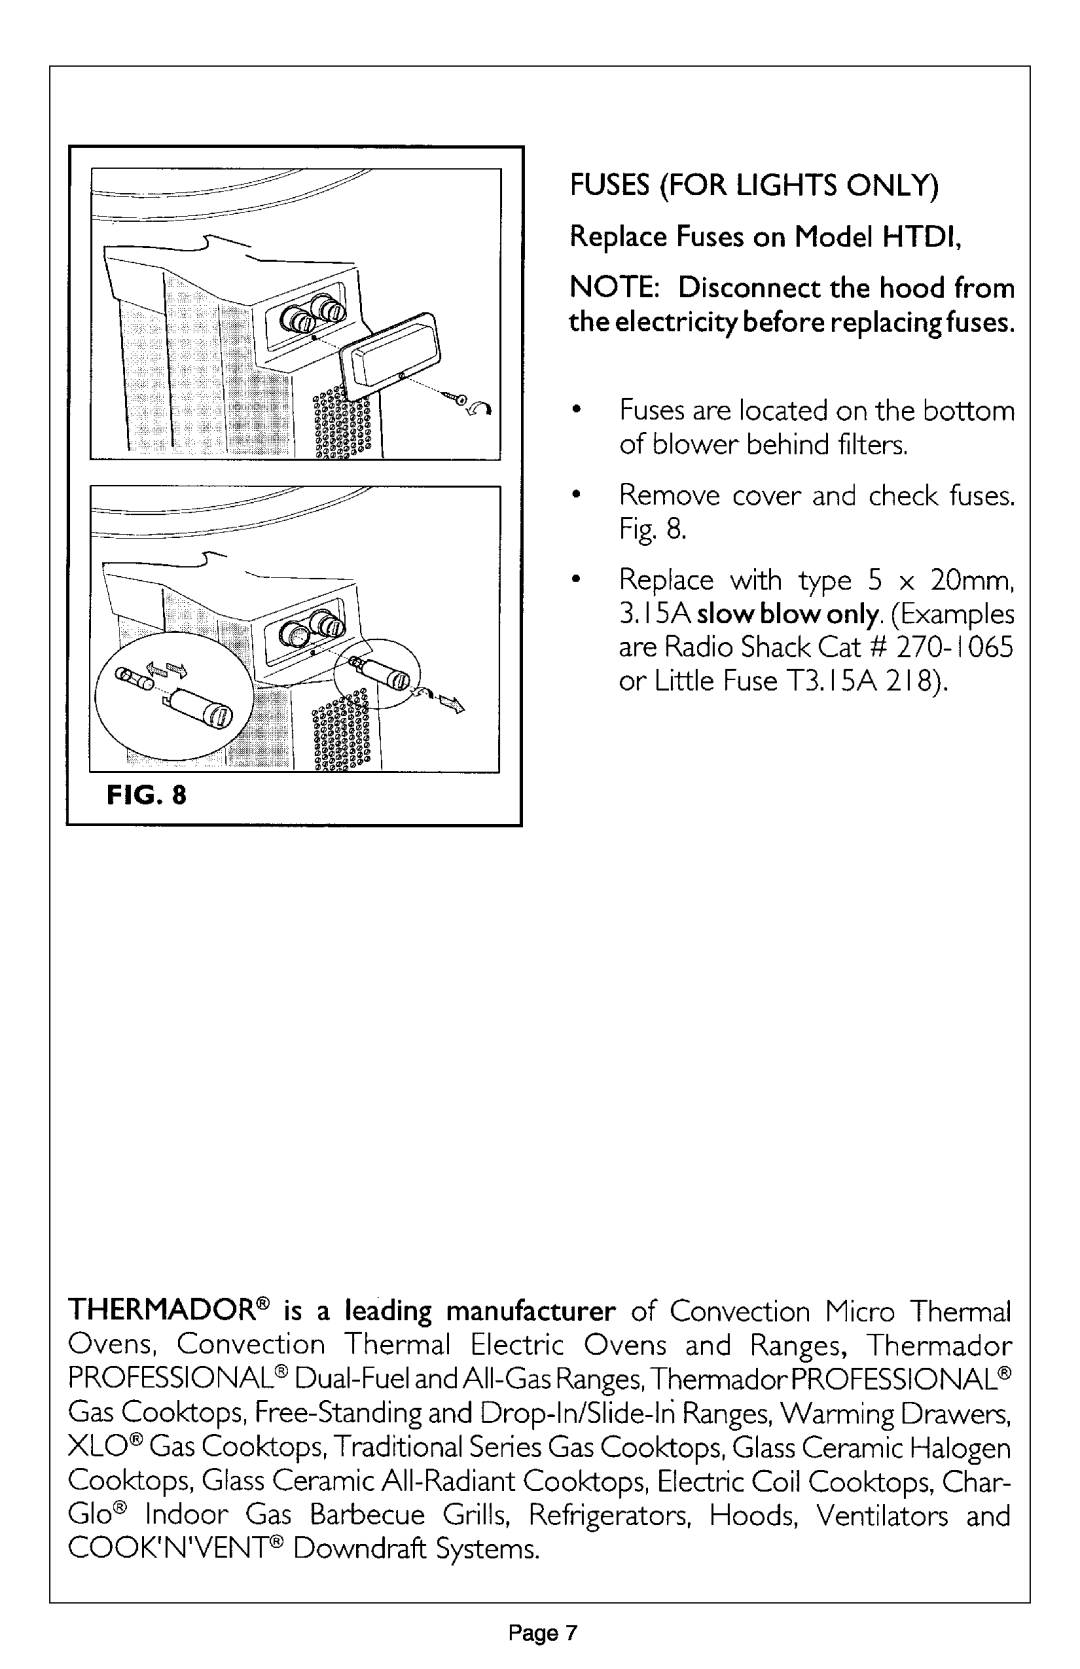 Thermador HGSI, HTDI installation instructions Page 